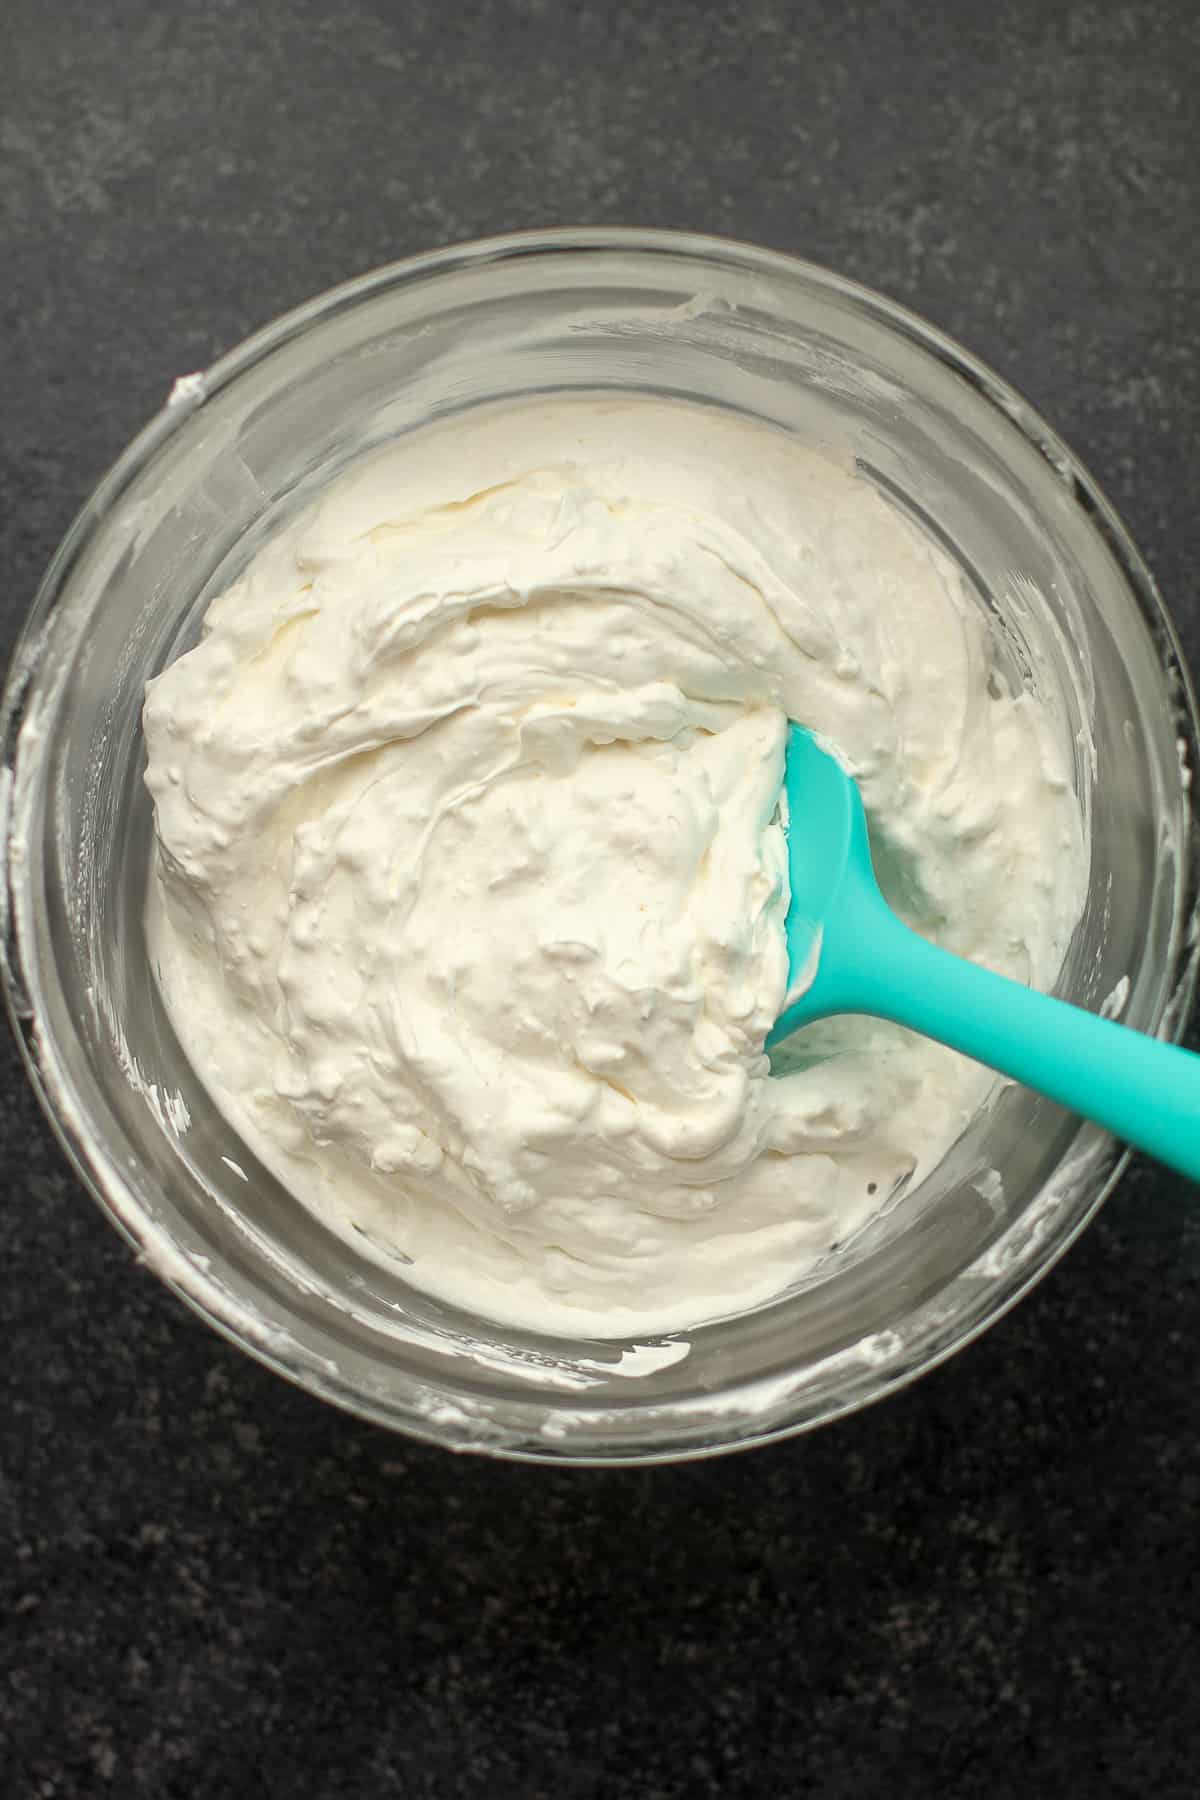 A bowl of the mixed cream cheese and cool whip.